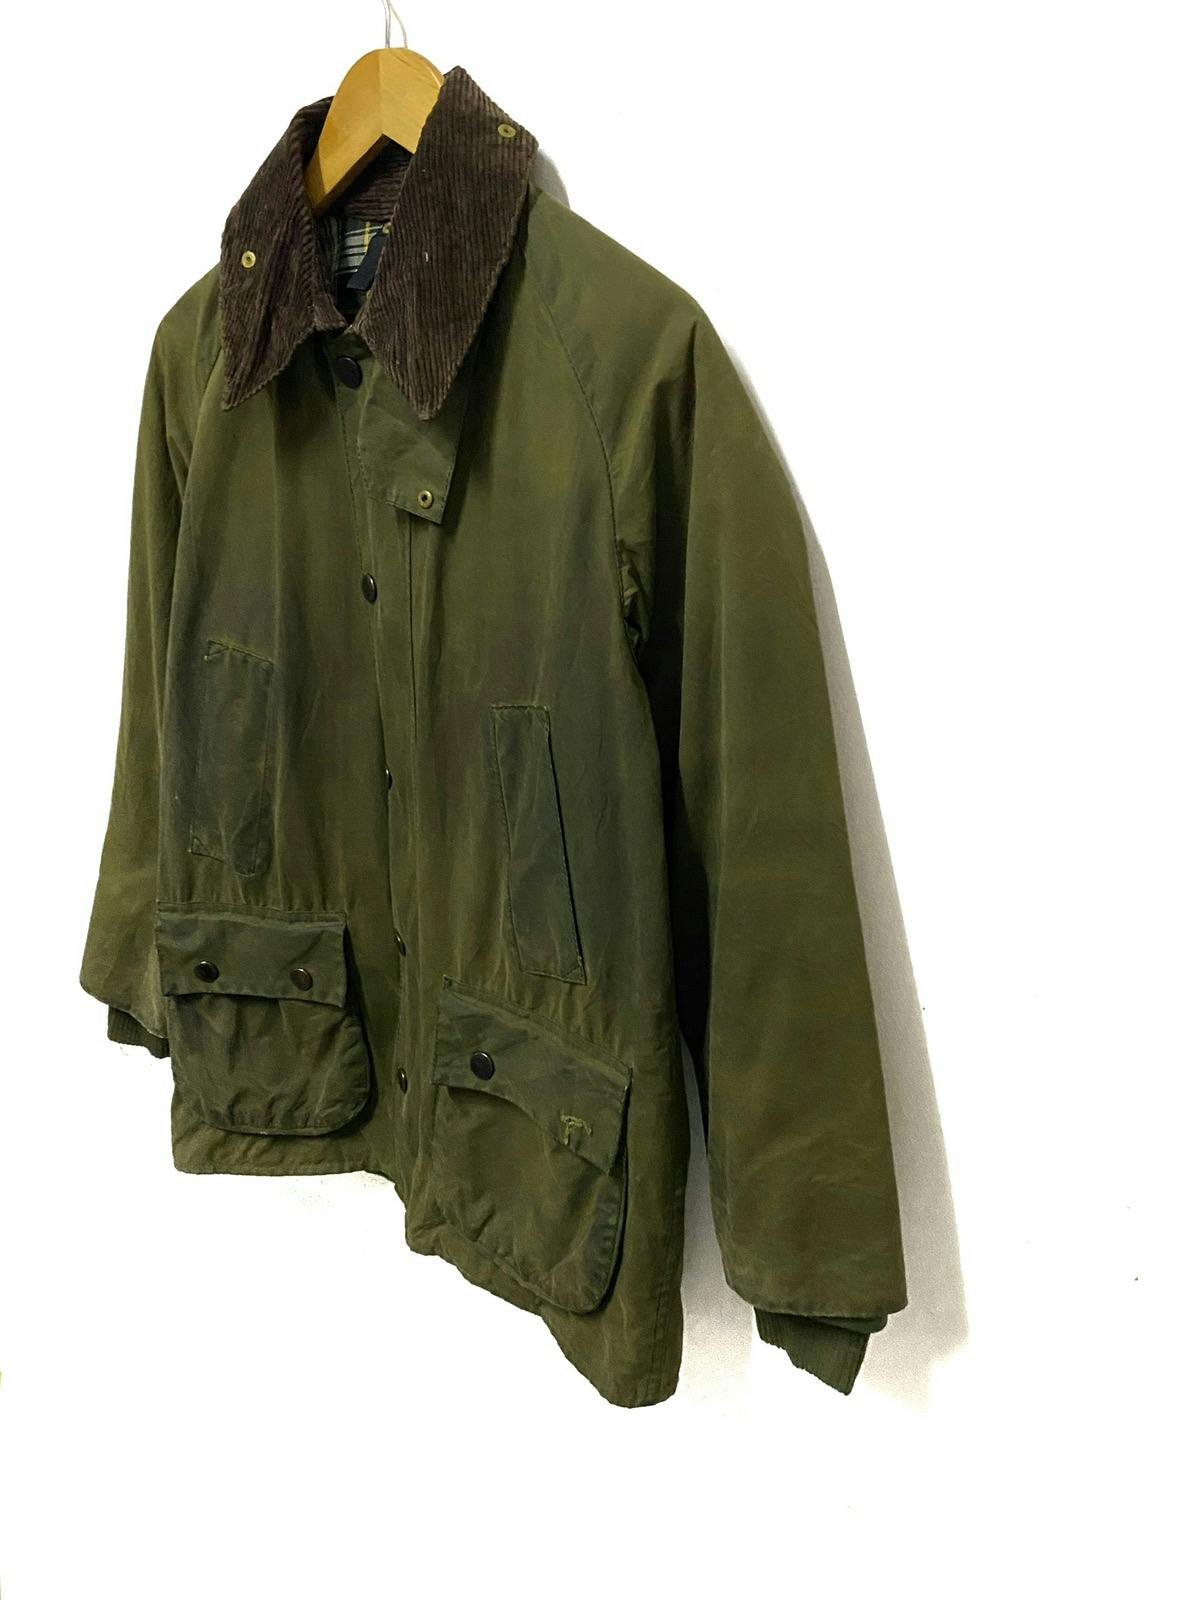 Barbour Bedale A100 Wax Jacket Made in England - 4